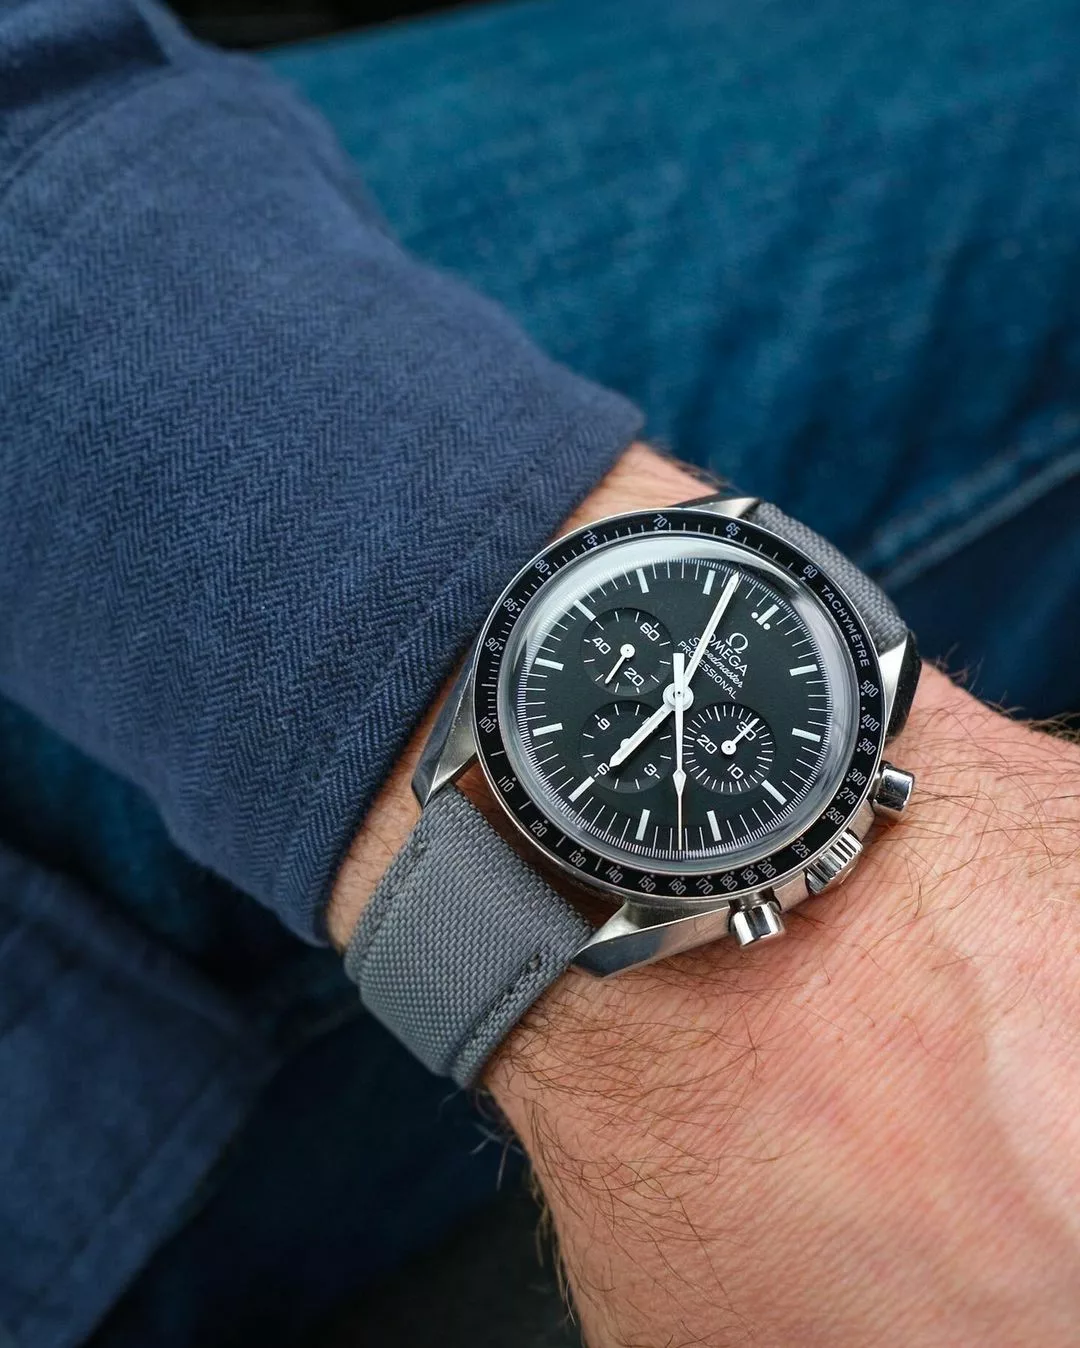 The Watch Strap Guide for the Omega Speedmaster Professional